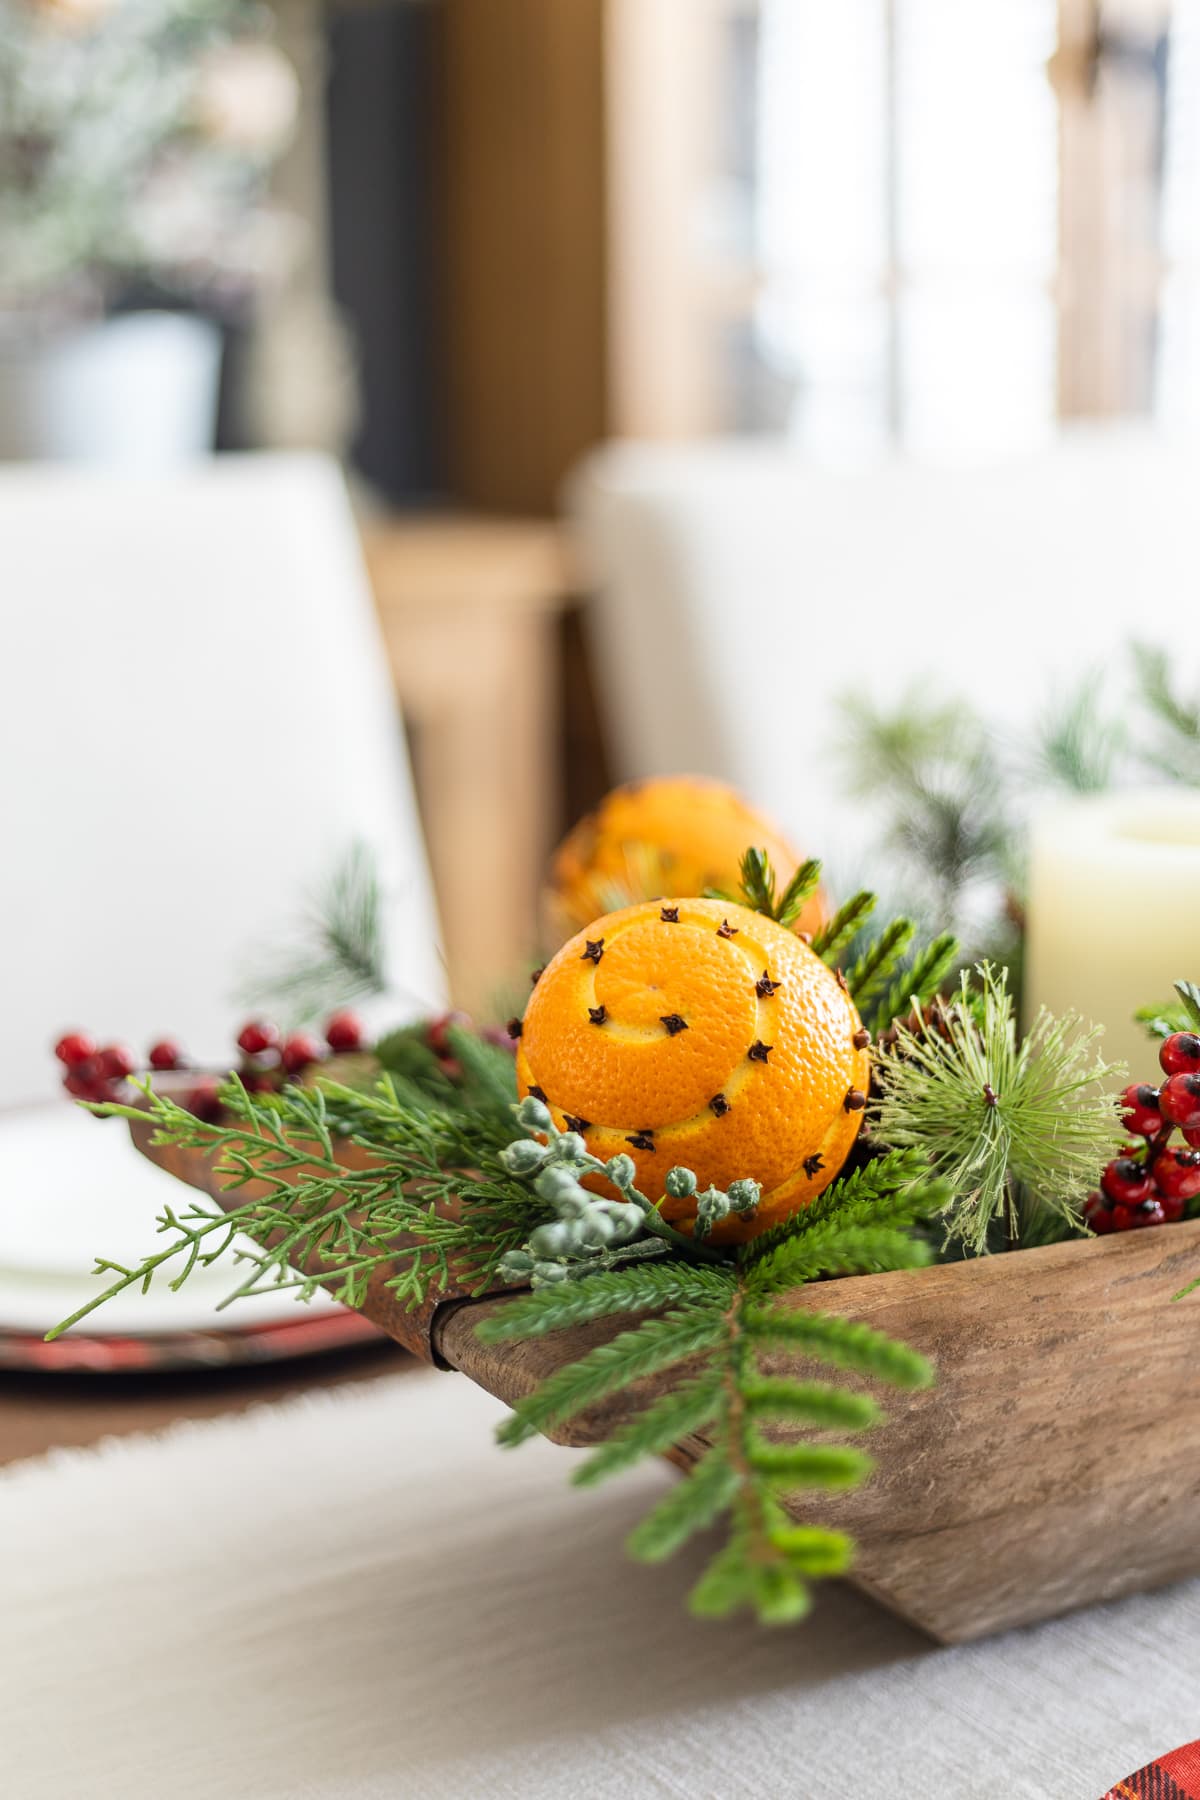 Orange pomander balls in DIY Christmas centerpiece with greenery and berries.